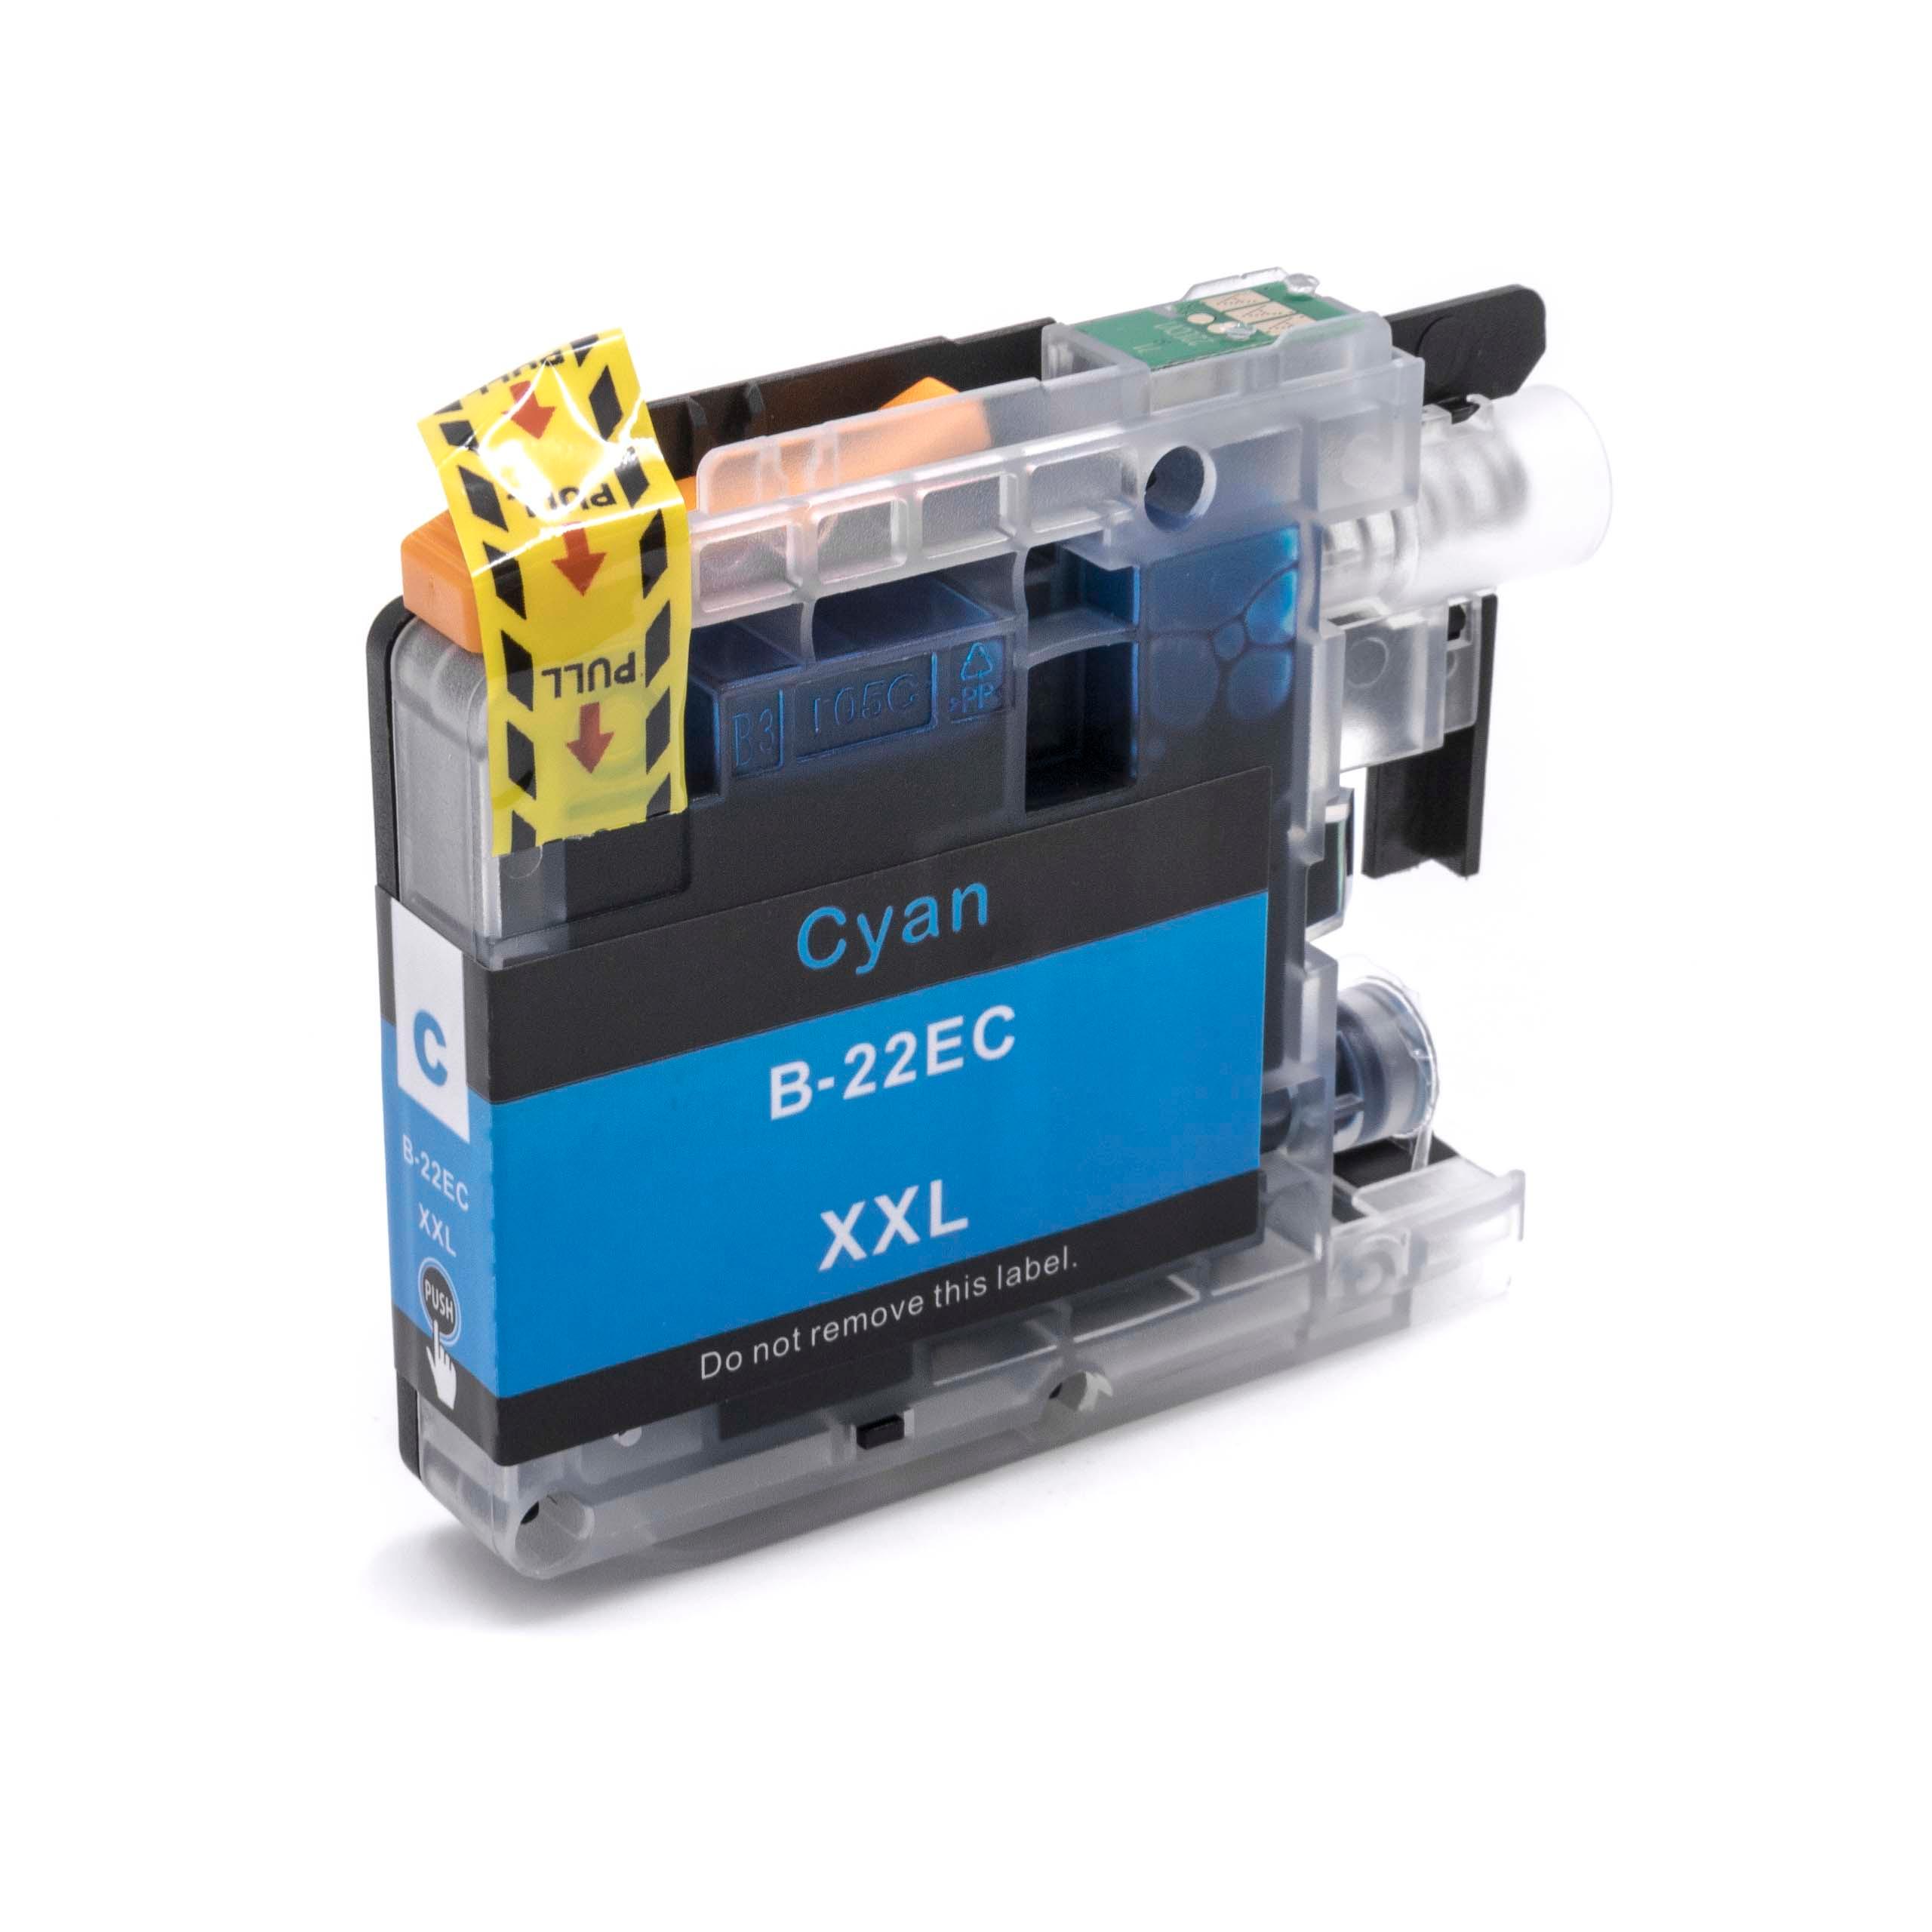 Ink Cartridge as Exchange for Brother LC22EC, LC-22E C, LC-22EC for Brother Printer - Cyan 15 ml + Chip